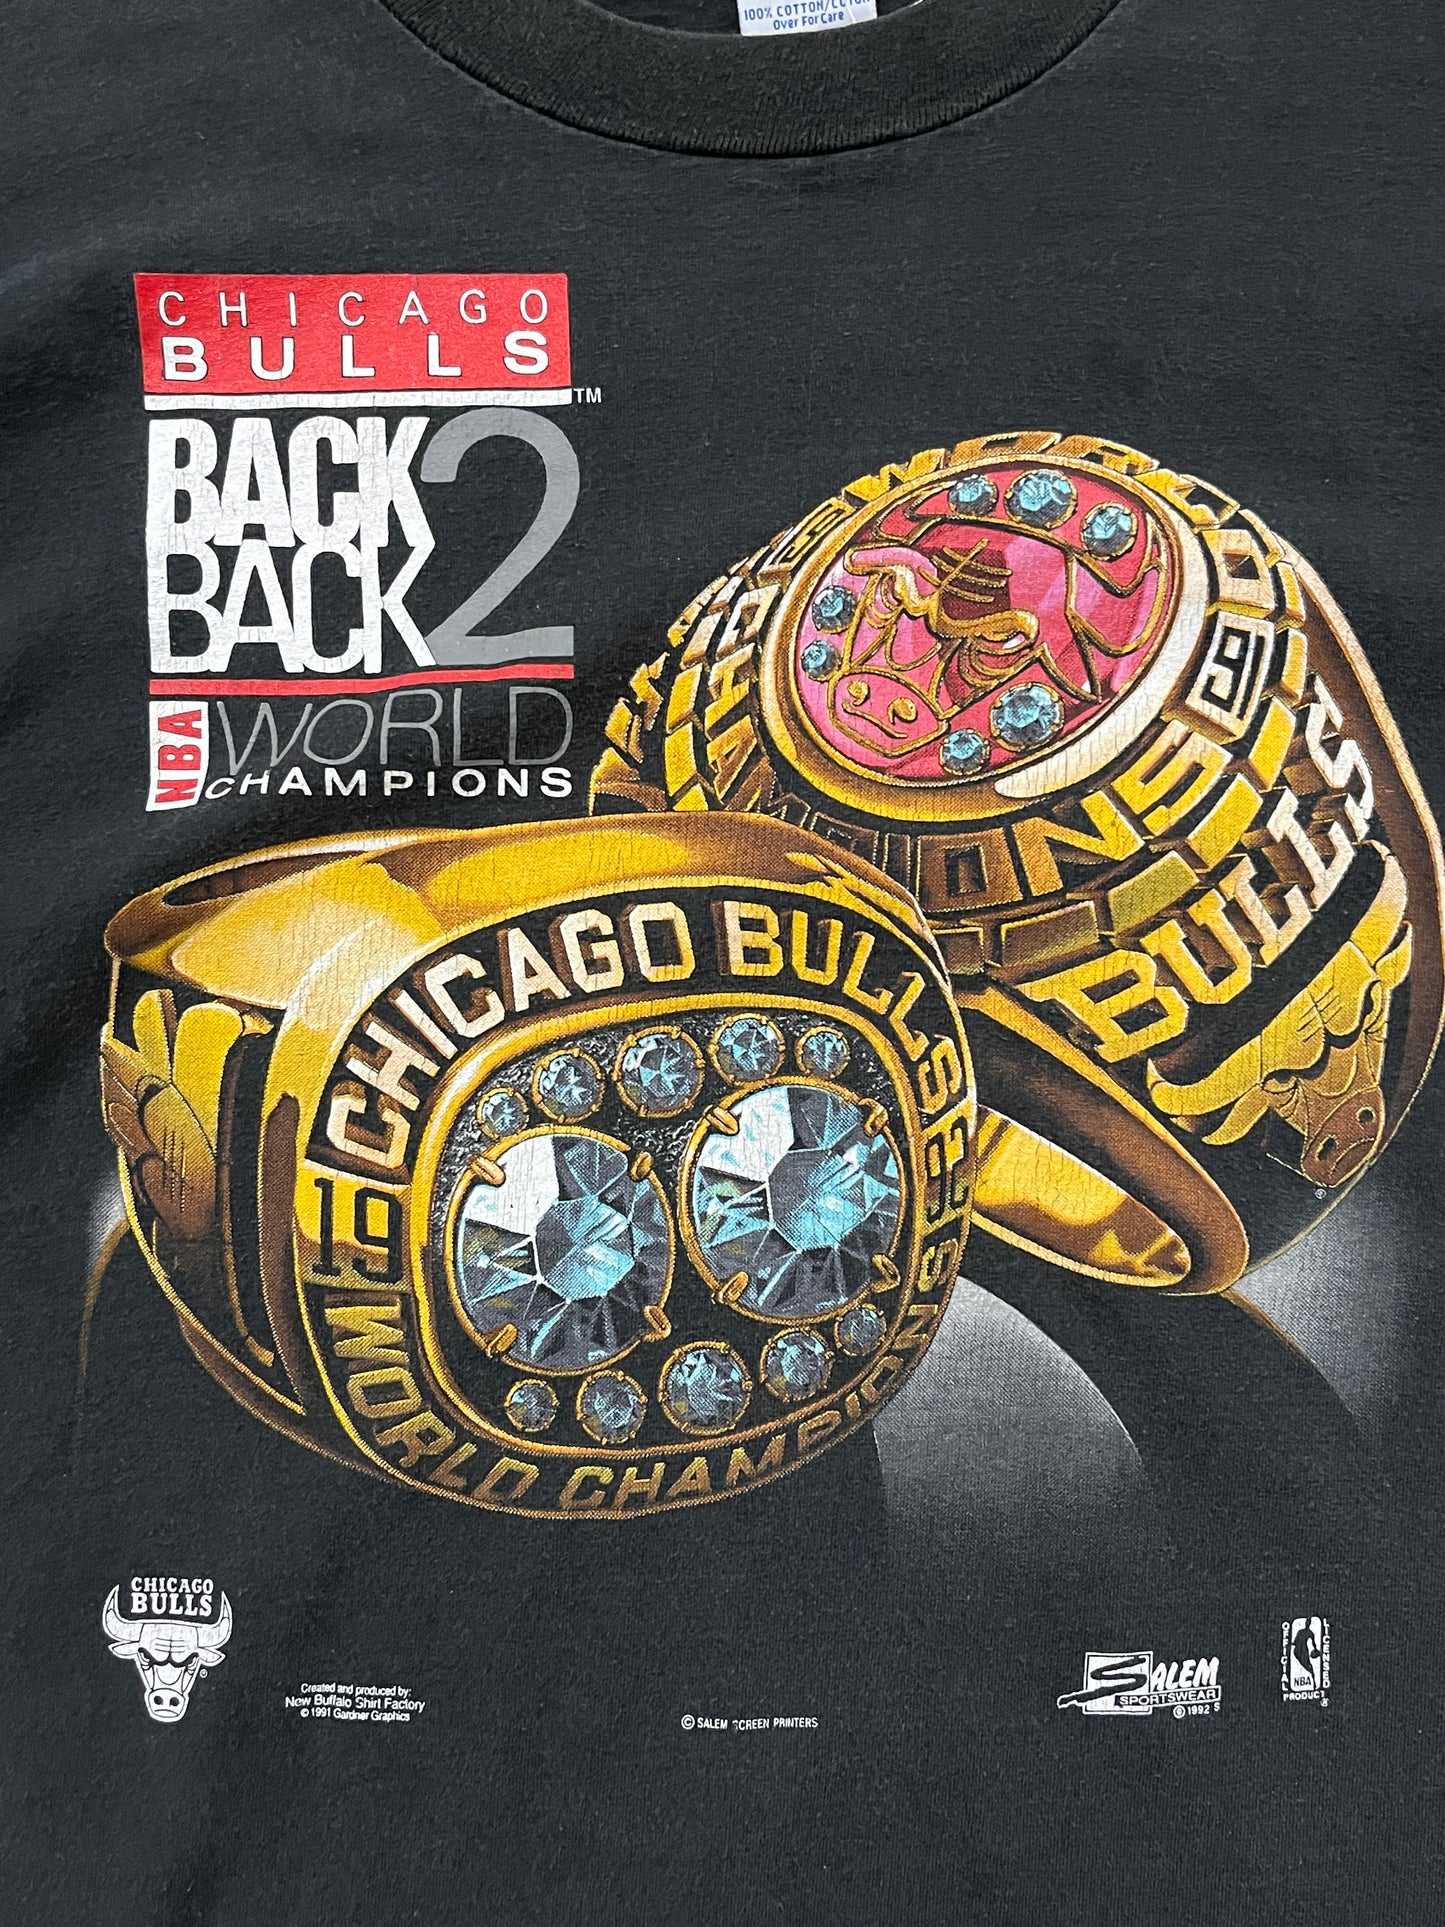 Vintage 90's Chicago Bulls Back To Back Champions Tee